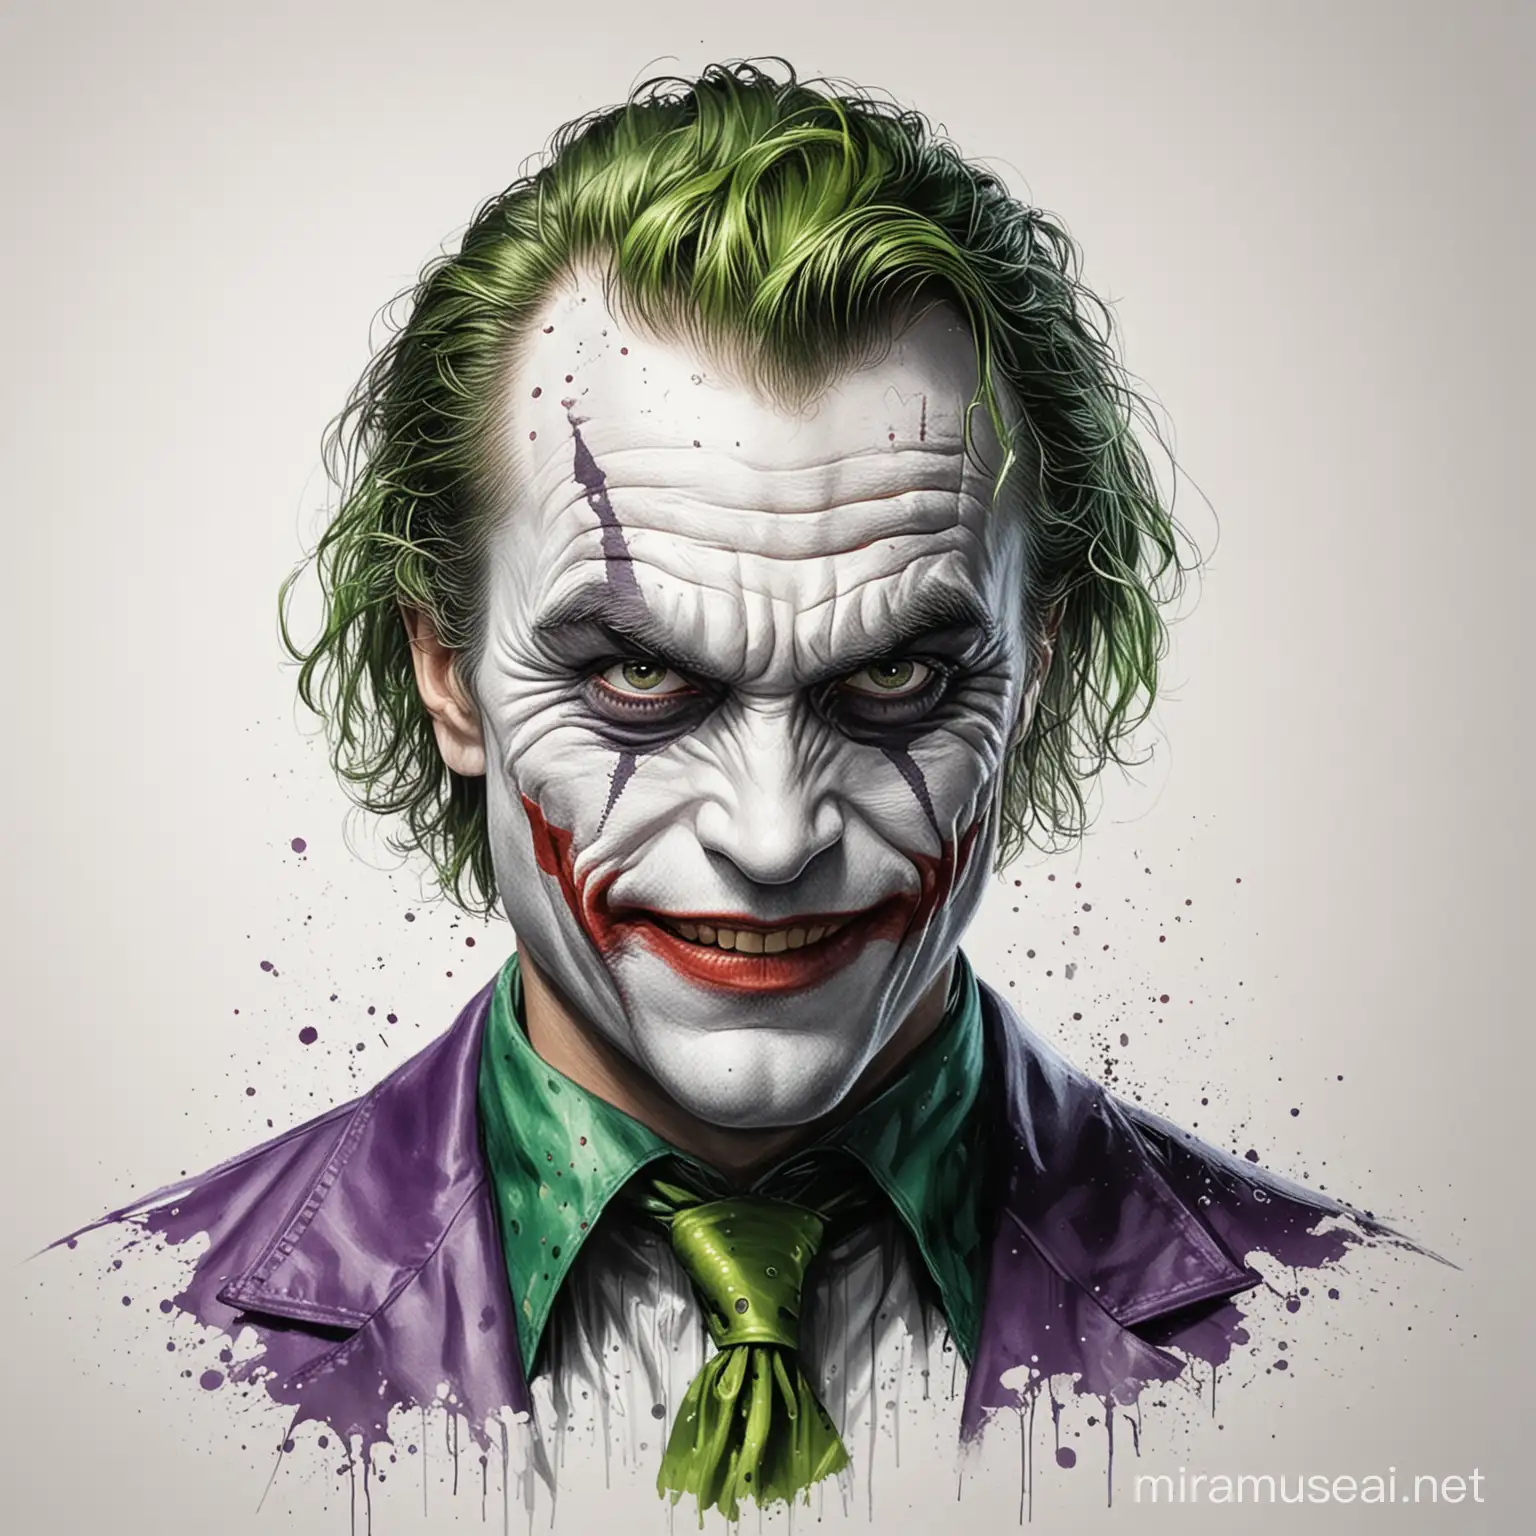 Colorful Drawing of The Joker from Batman Against a White Background